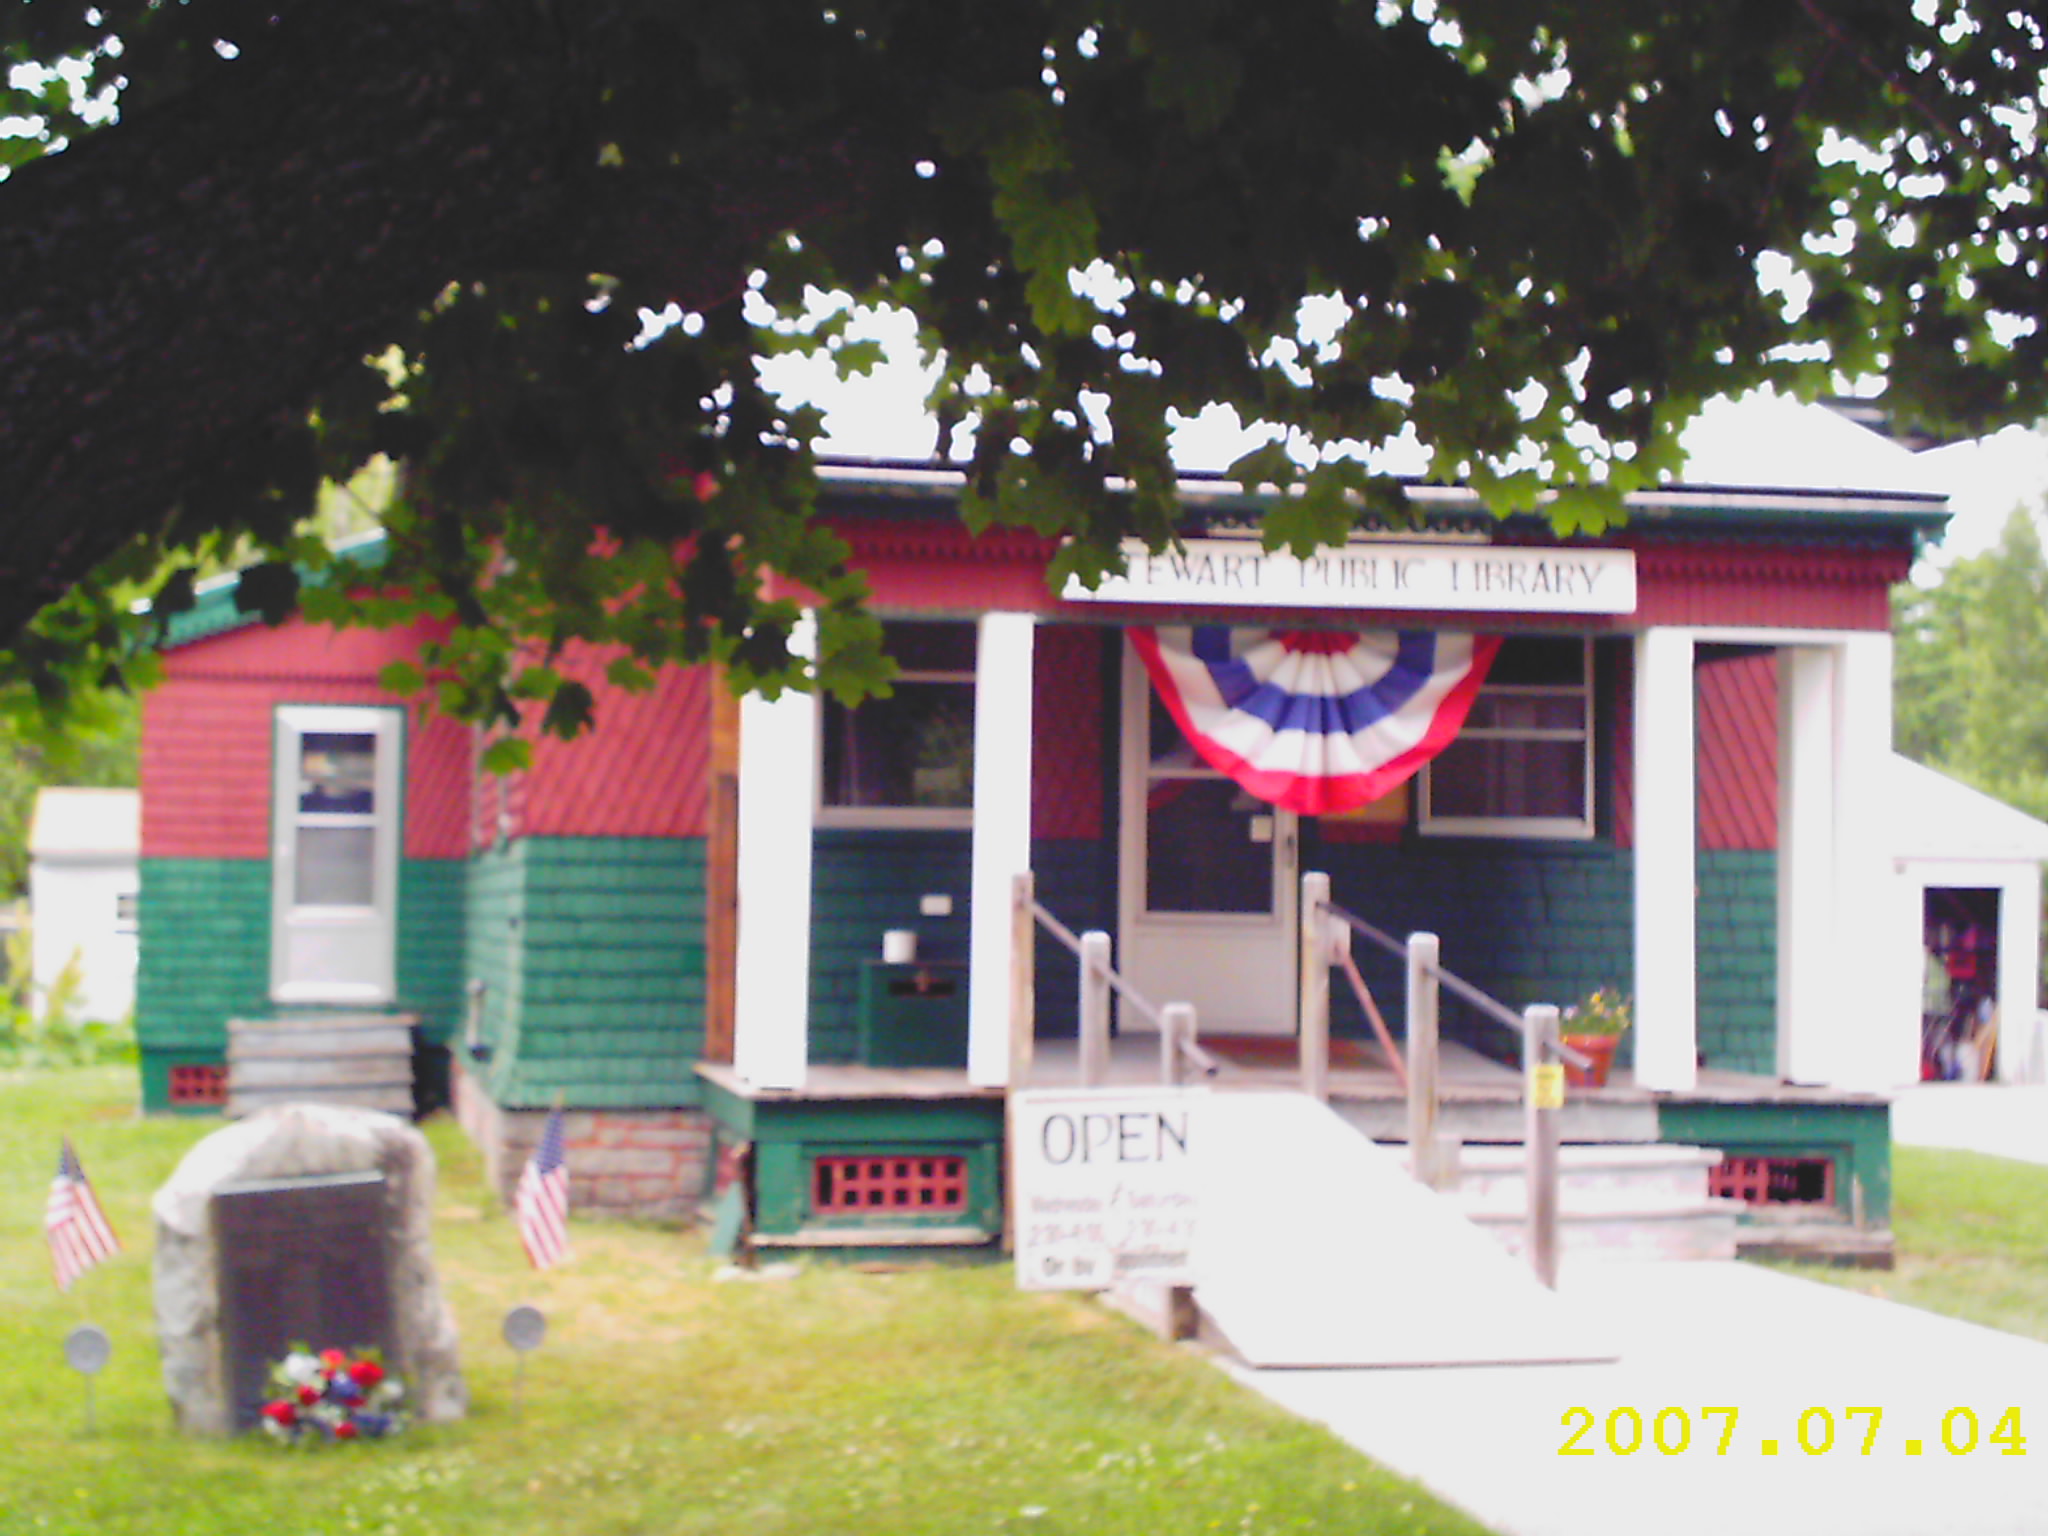 Stewart Public Library on Memorial Day